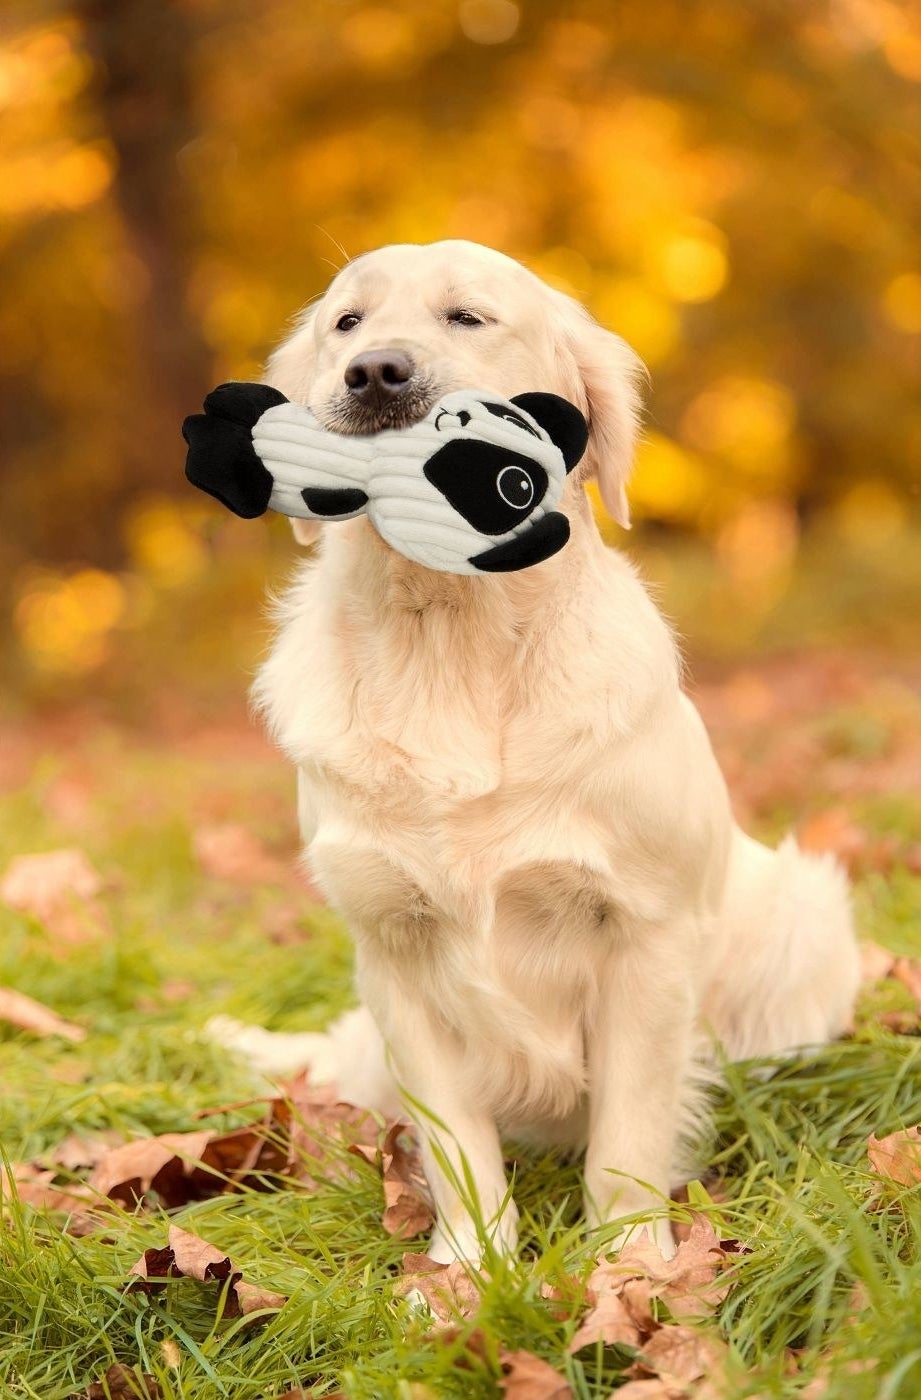 golden retriever on the grass with panda plushie in its mouth